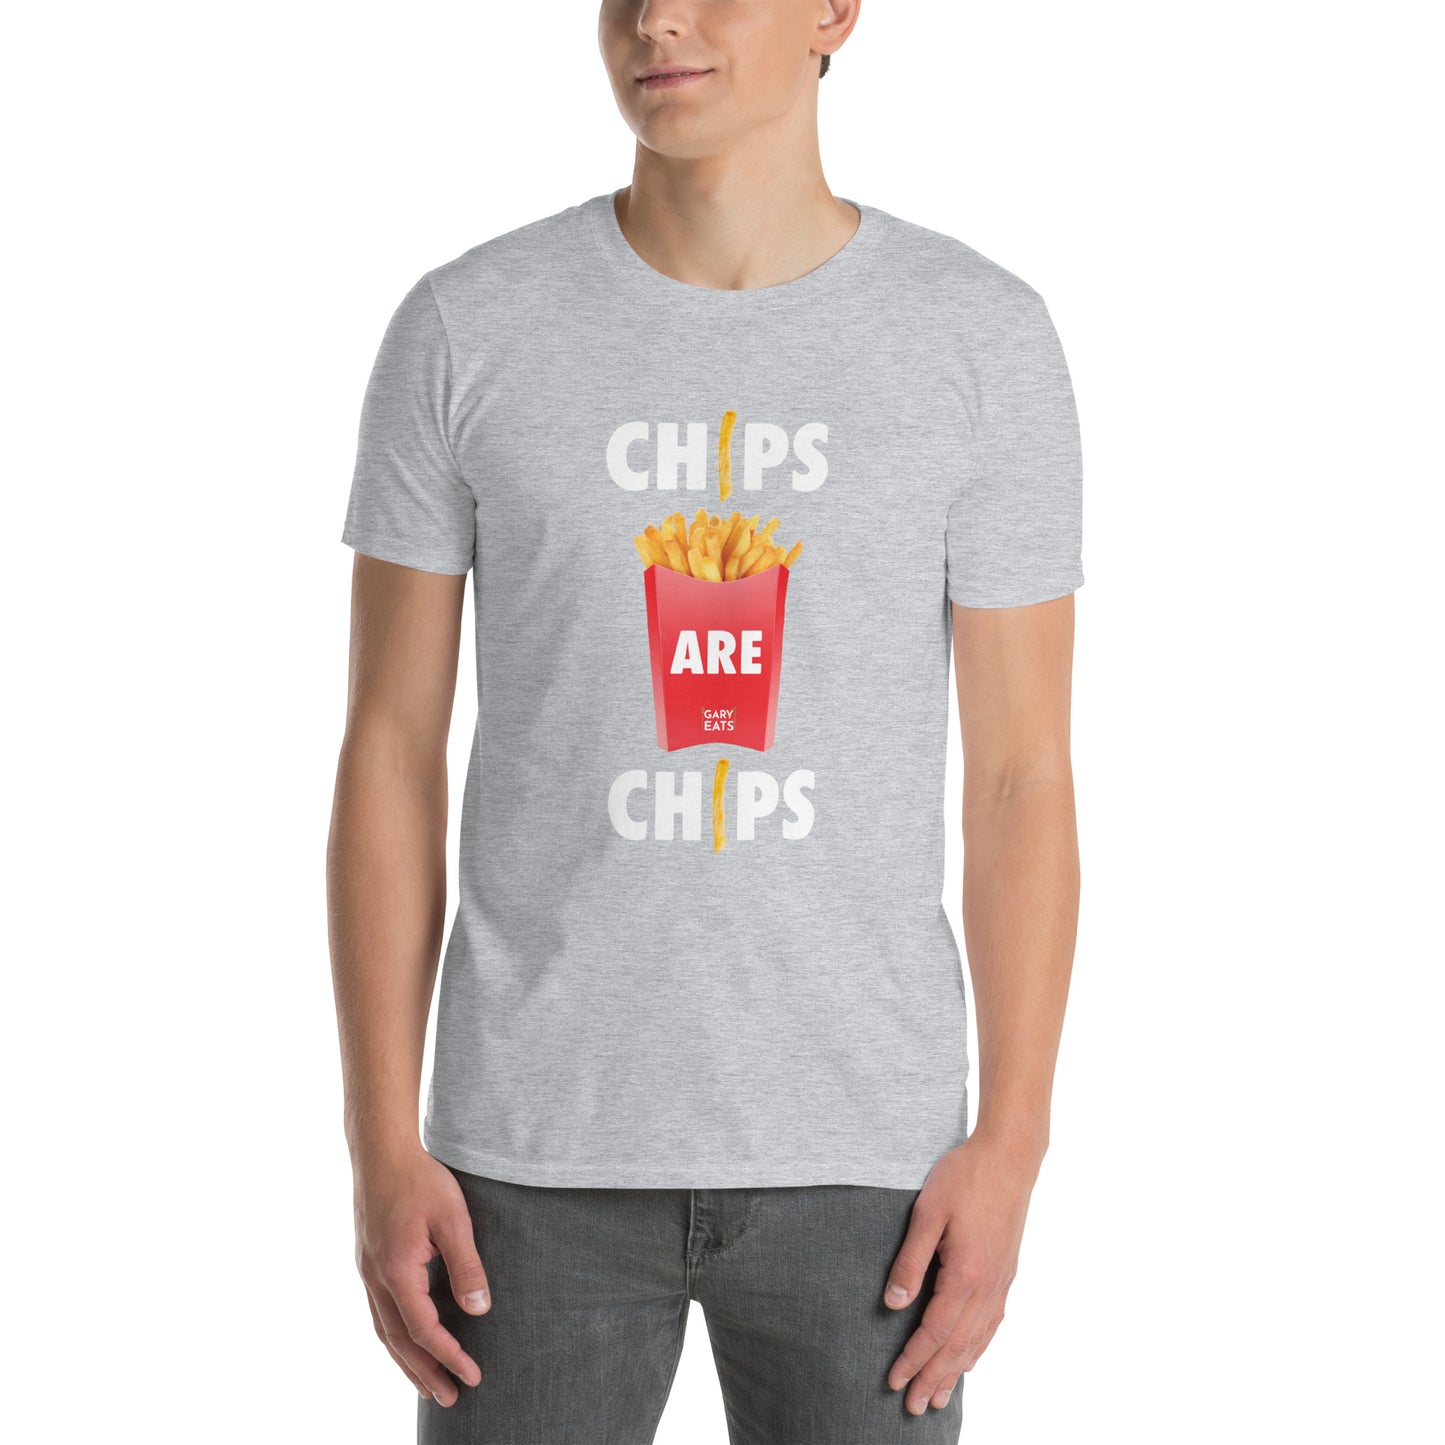 Gary Eats Chips are Chips Unisex T-Shirt